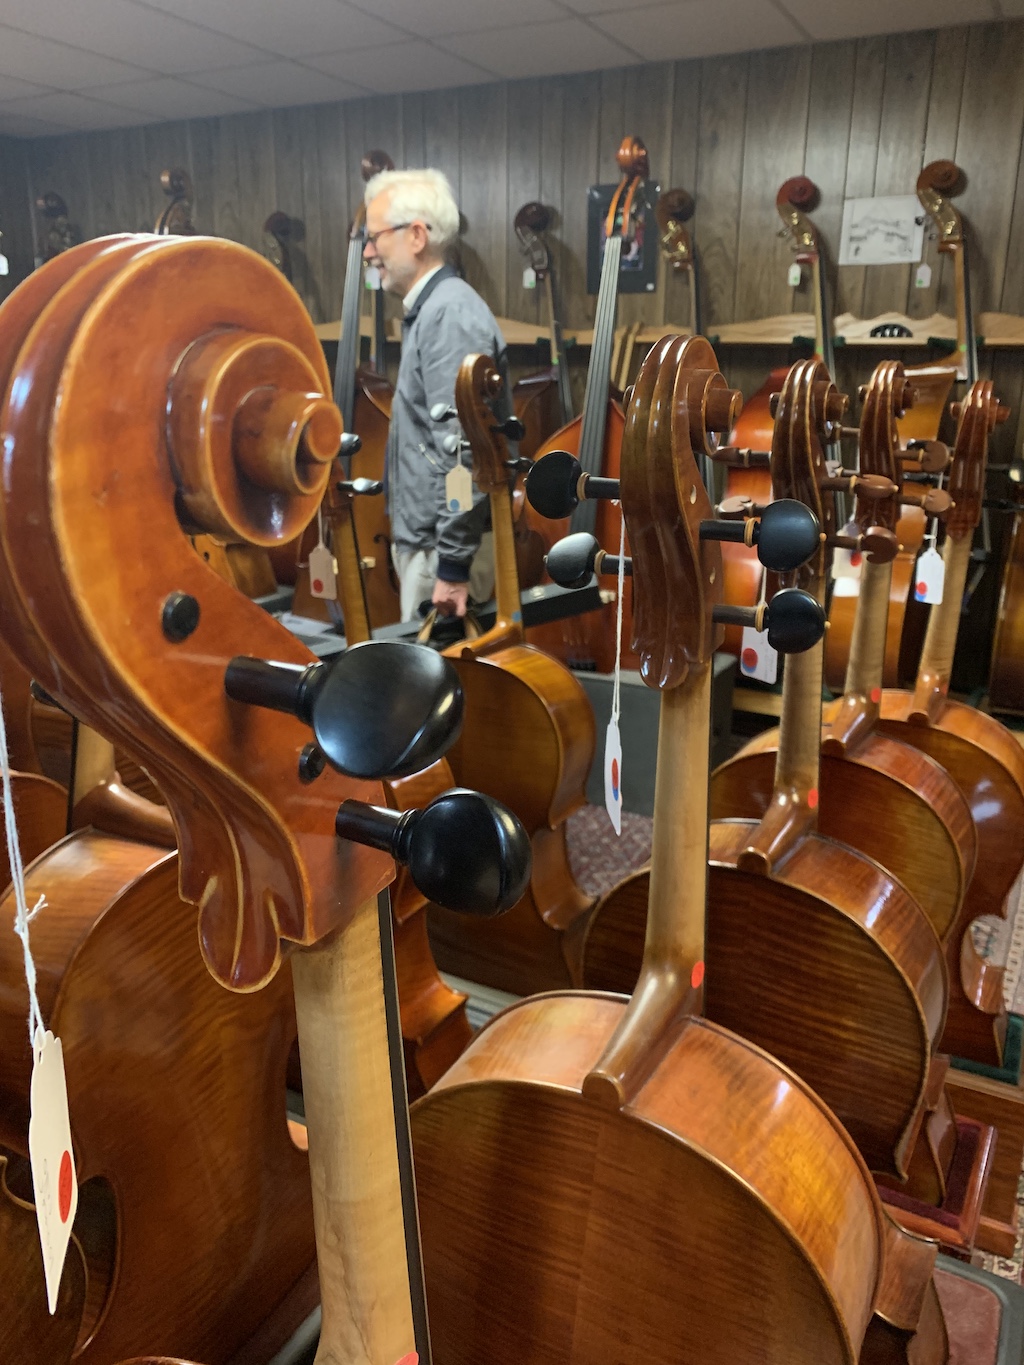 Architect, cellist, and composer N. Scott Johnson at The Loft Violin Shop in Columbus, OH